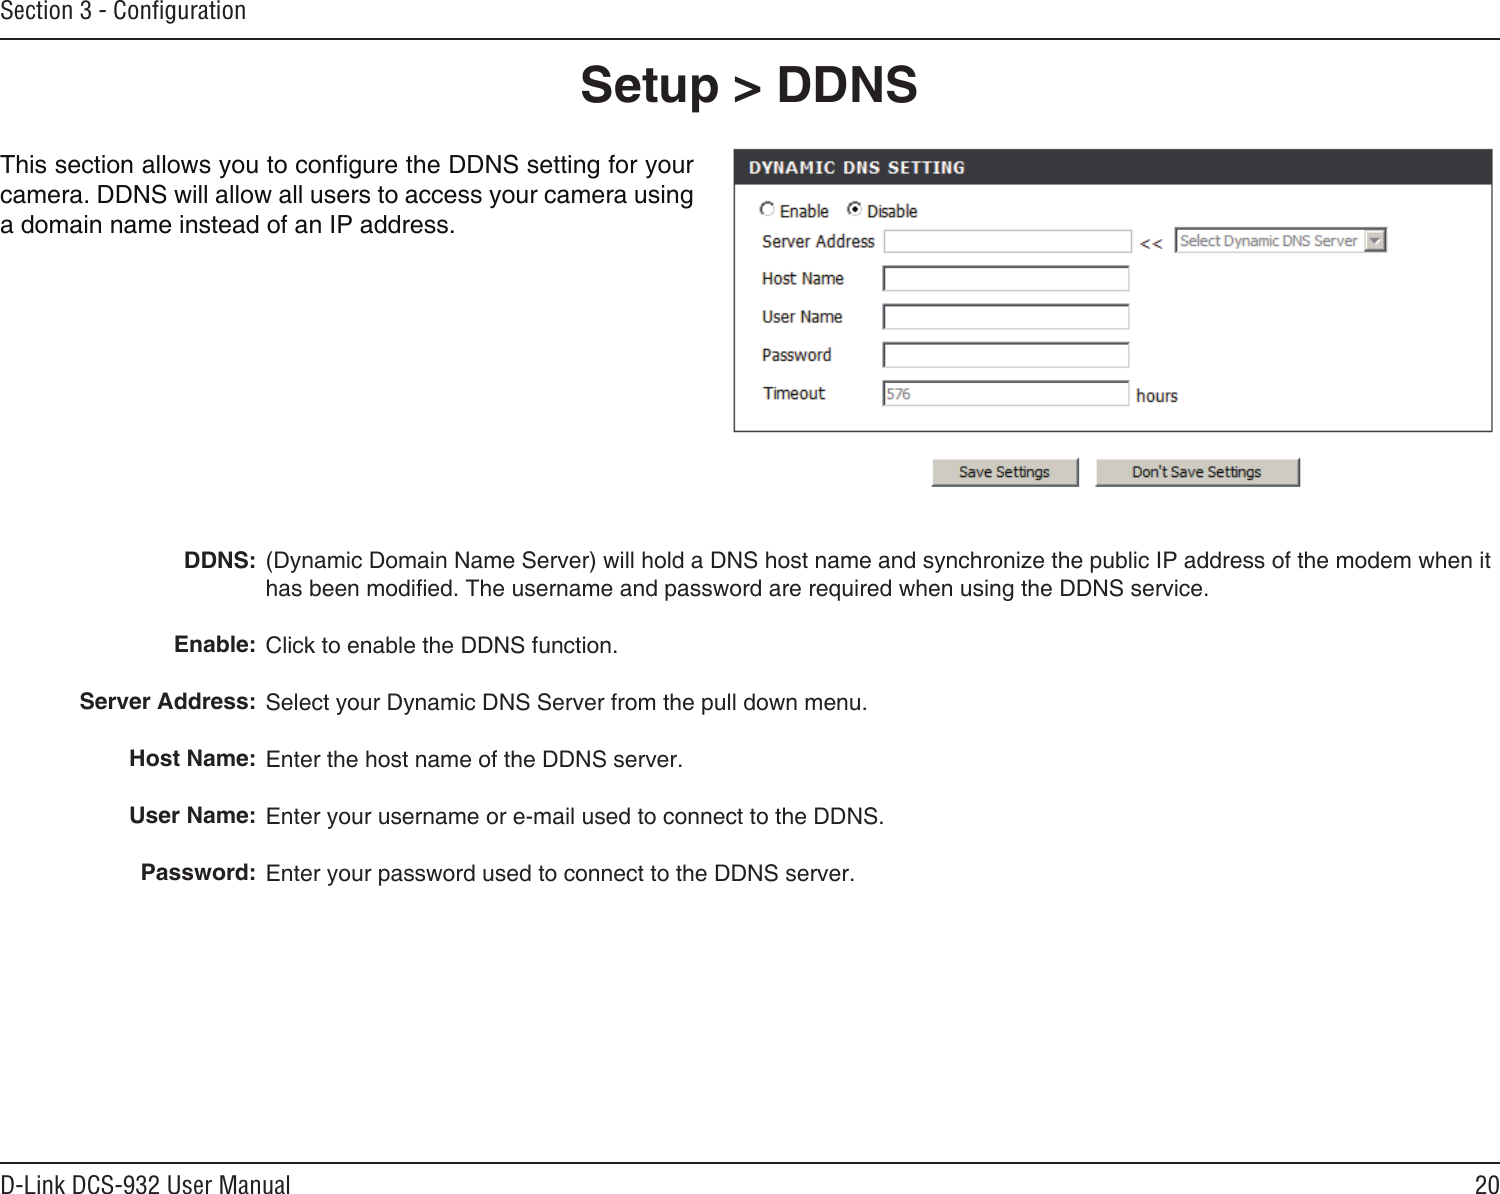 20D-Link DCS-932 User ManualSection 3 - Conﬁguration(Dynamic Domain Name Server) will hold a DNS host name and synchronize the public IP address of the modem when it has been modied. The username and password are required when using the DDNS service.Click to enable the DDNS function.Select your Dynamic DNS Server from the pull down menu.Enter the host name of the DDNS server.Enter your username or e-mail used to connect to the DDNS.Enter your password used to connect to the DDNS server.DDNS: Enable:Server Address: Host Name:User Name:Password:Setup &gt; DDNS This section allows you to congure the DDNS setting for your camera. DDNS will allow all users to access your camera using a domain name instead of an IP address.